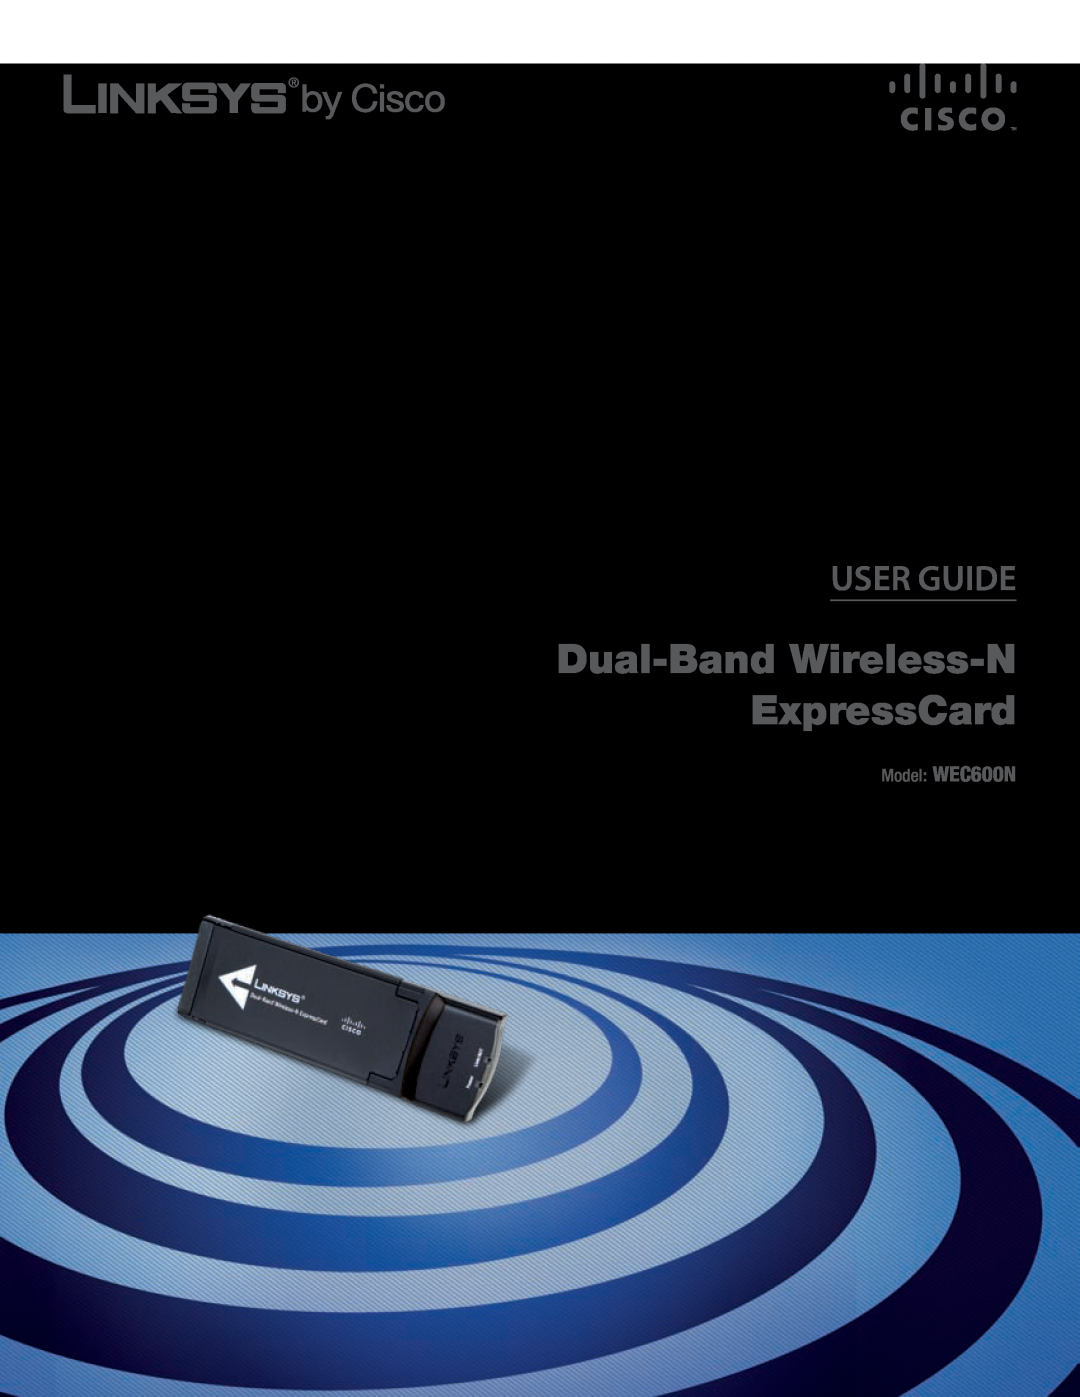 Cisco Systems manual Dual-Band Wireless-N ExpressCard, User Guide, Model WEC600N 